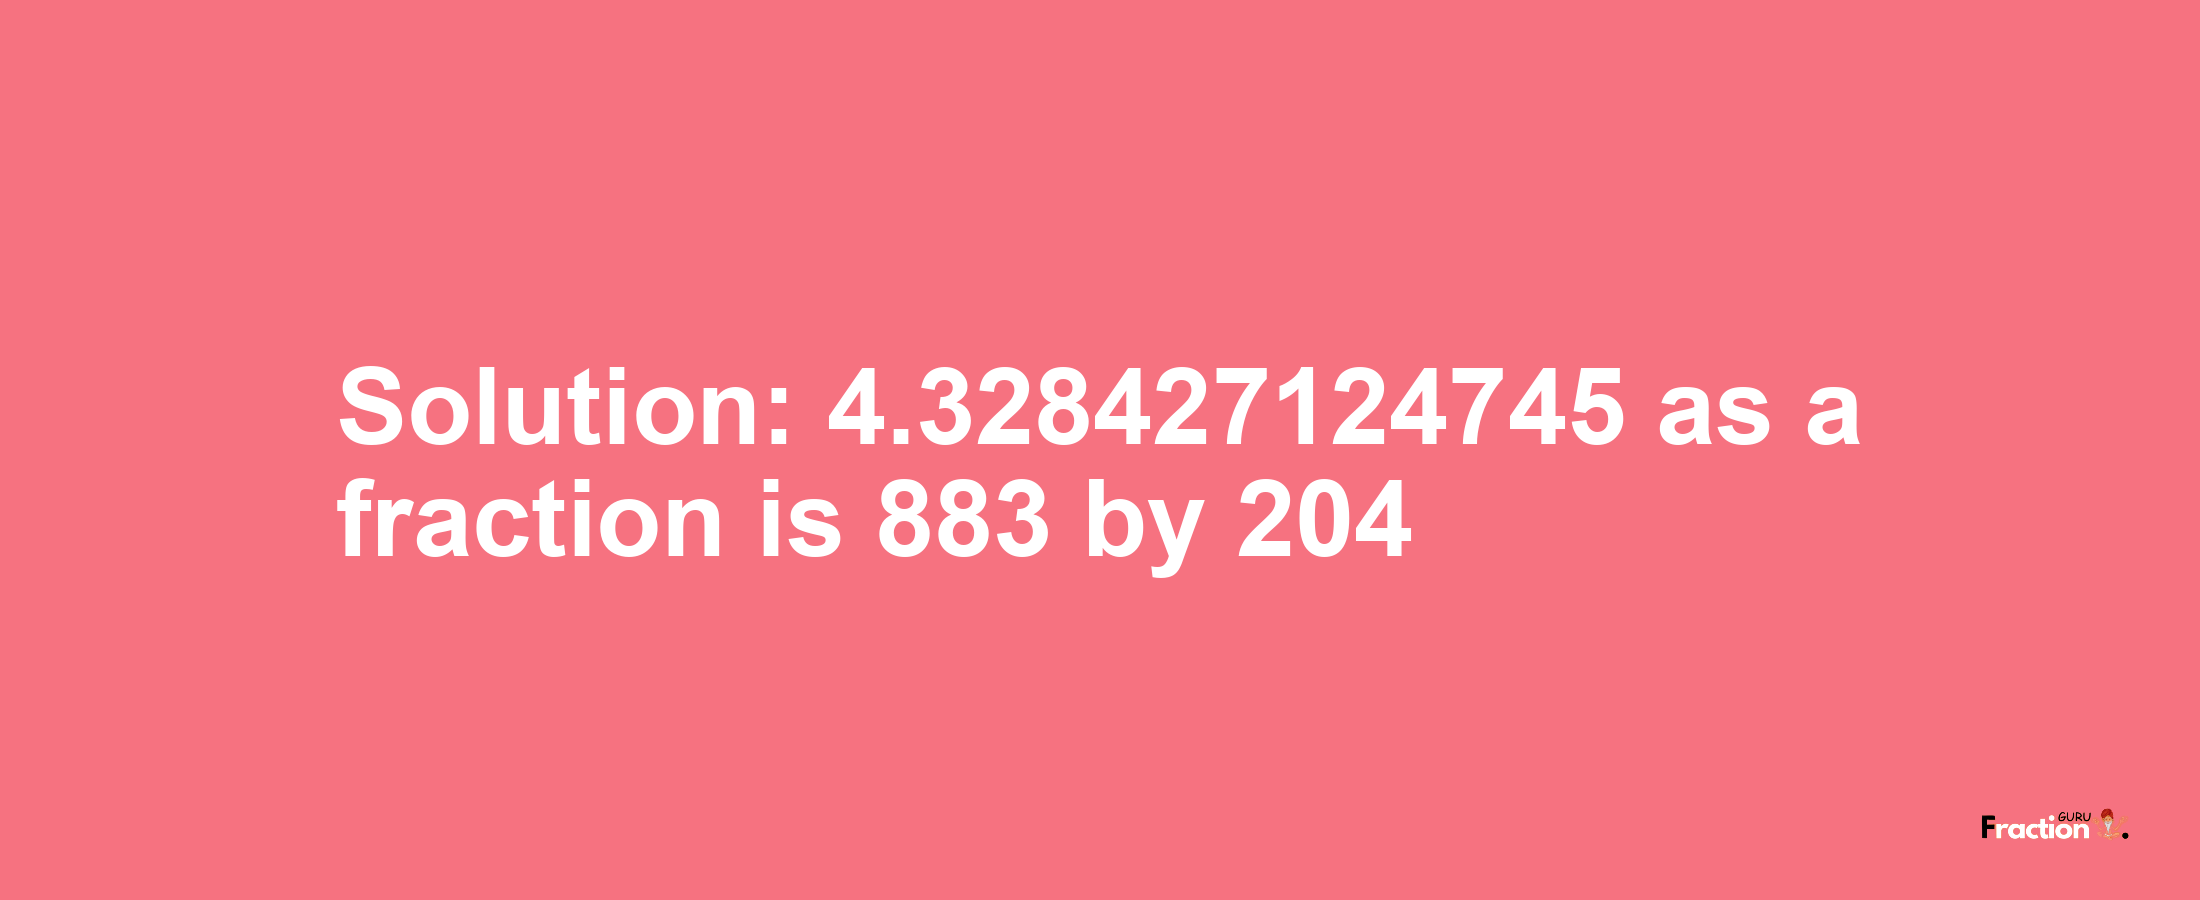 Solution:4.328427124745 as a fraction is 883/204